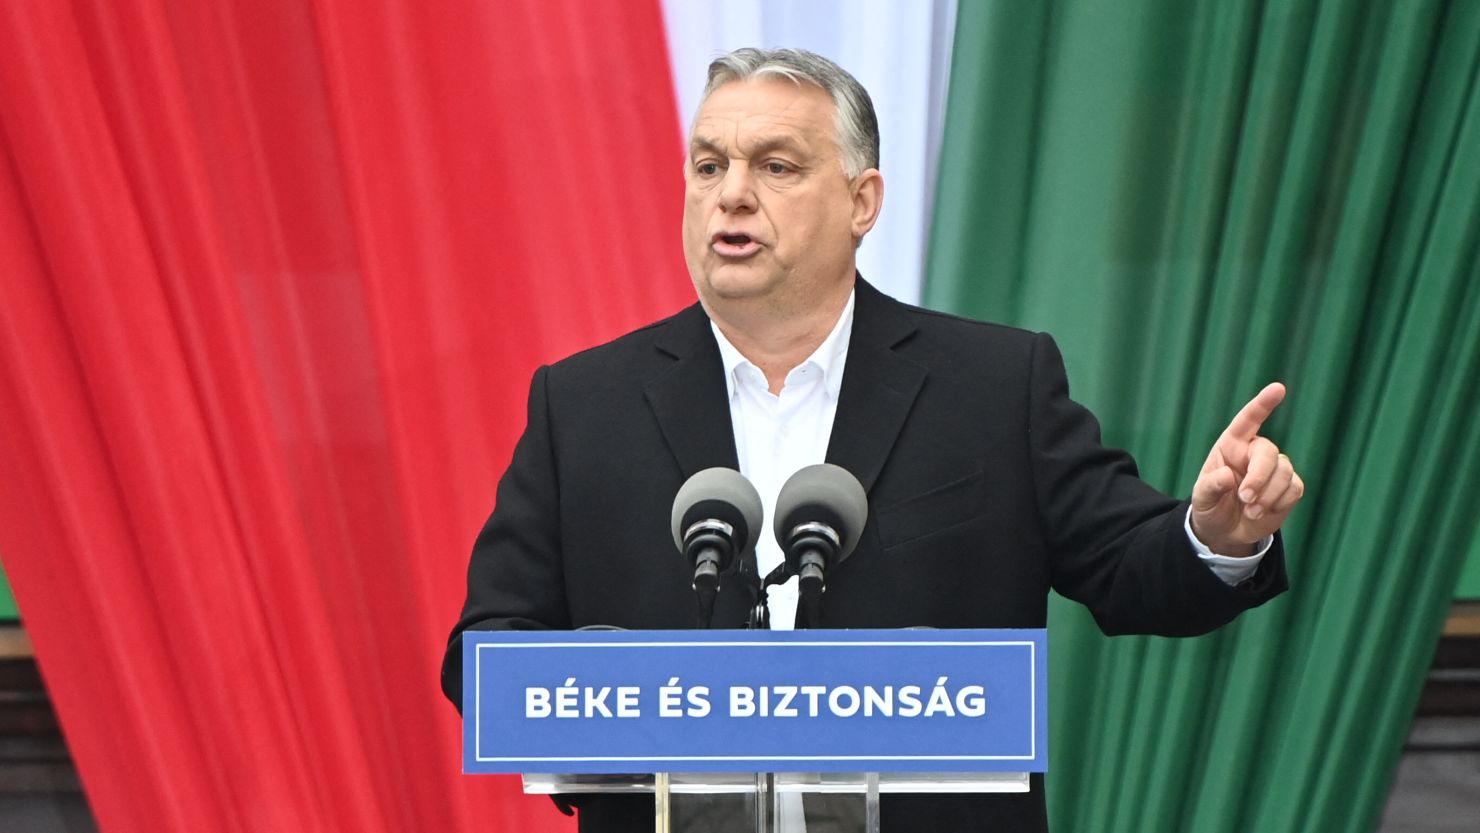 Orban during his election campaign in April, which resulted in a landslide victory.